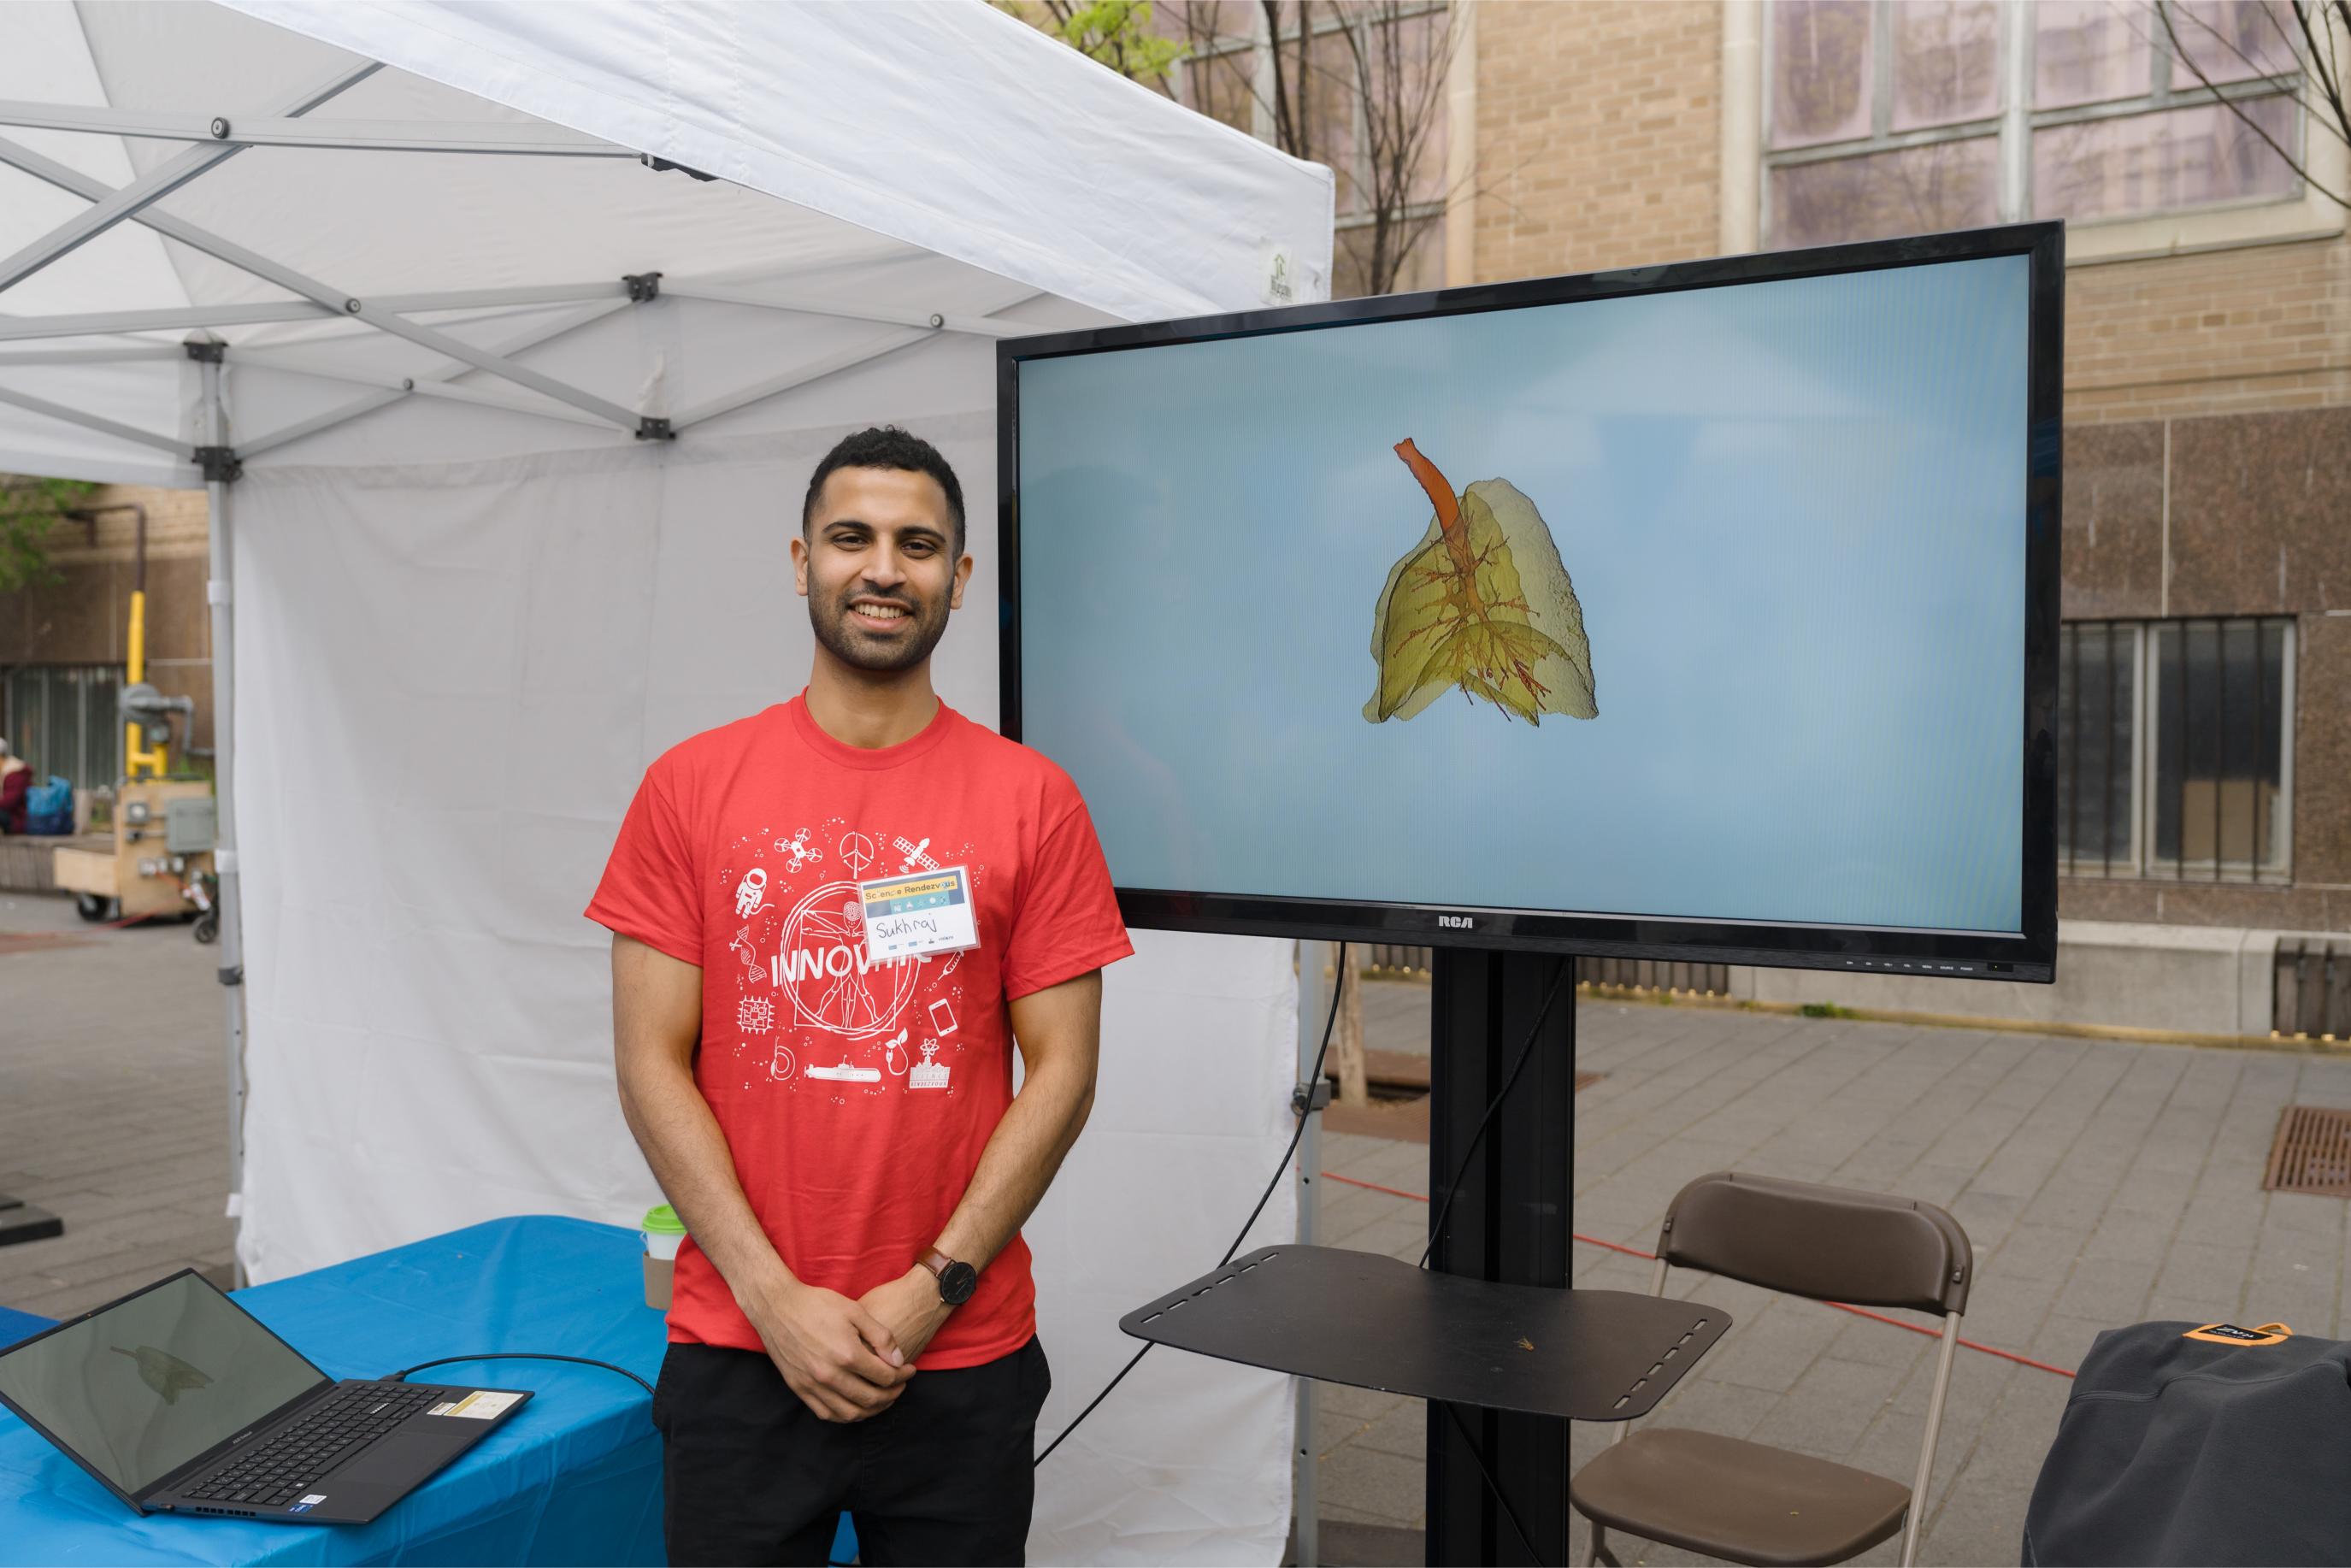 A volunteer standing in front of a TV screen which showcases a 3D model of the human lung at the Lung Function Booth.